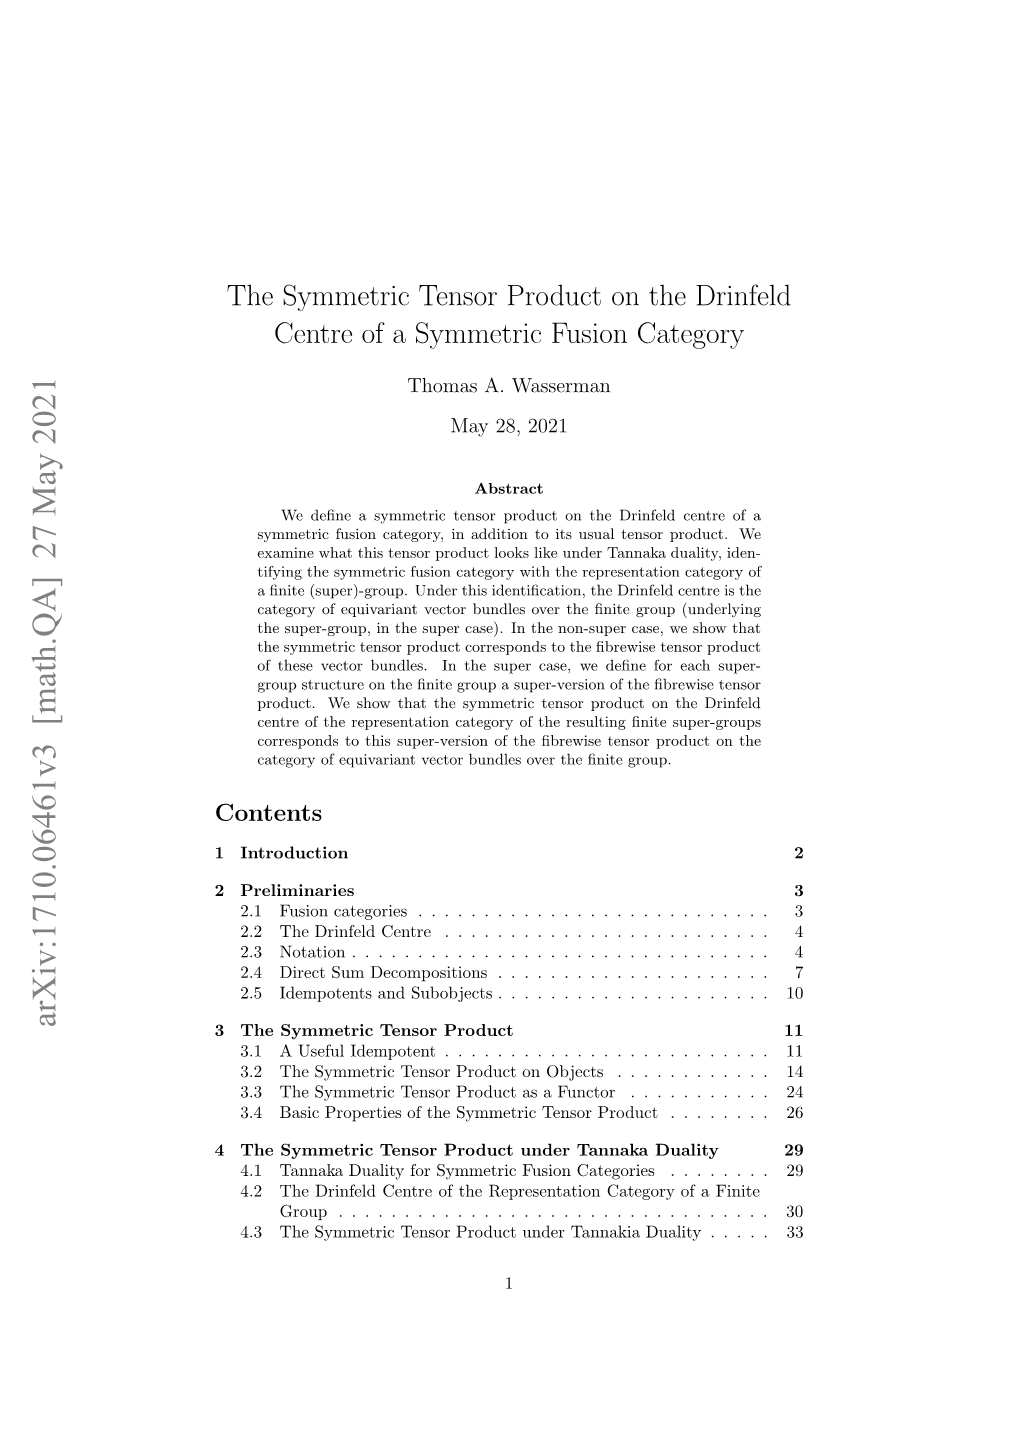 The Symmetric Tensor Product on the Drinfeld Centre of A